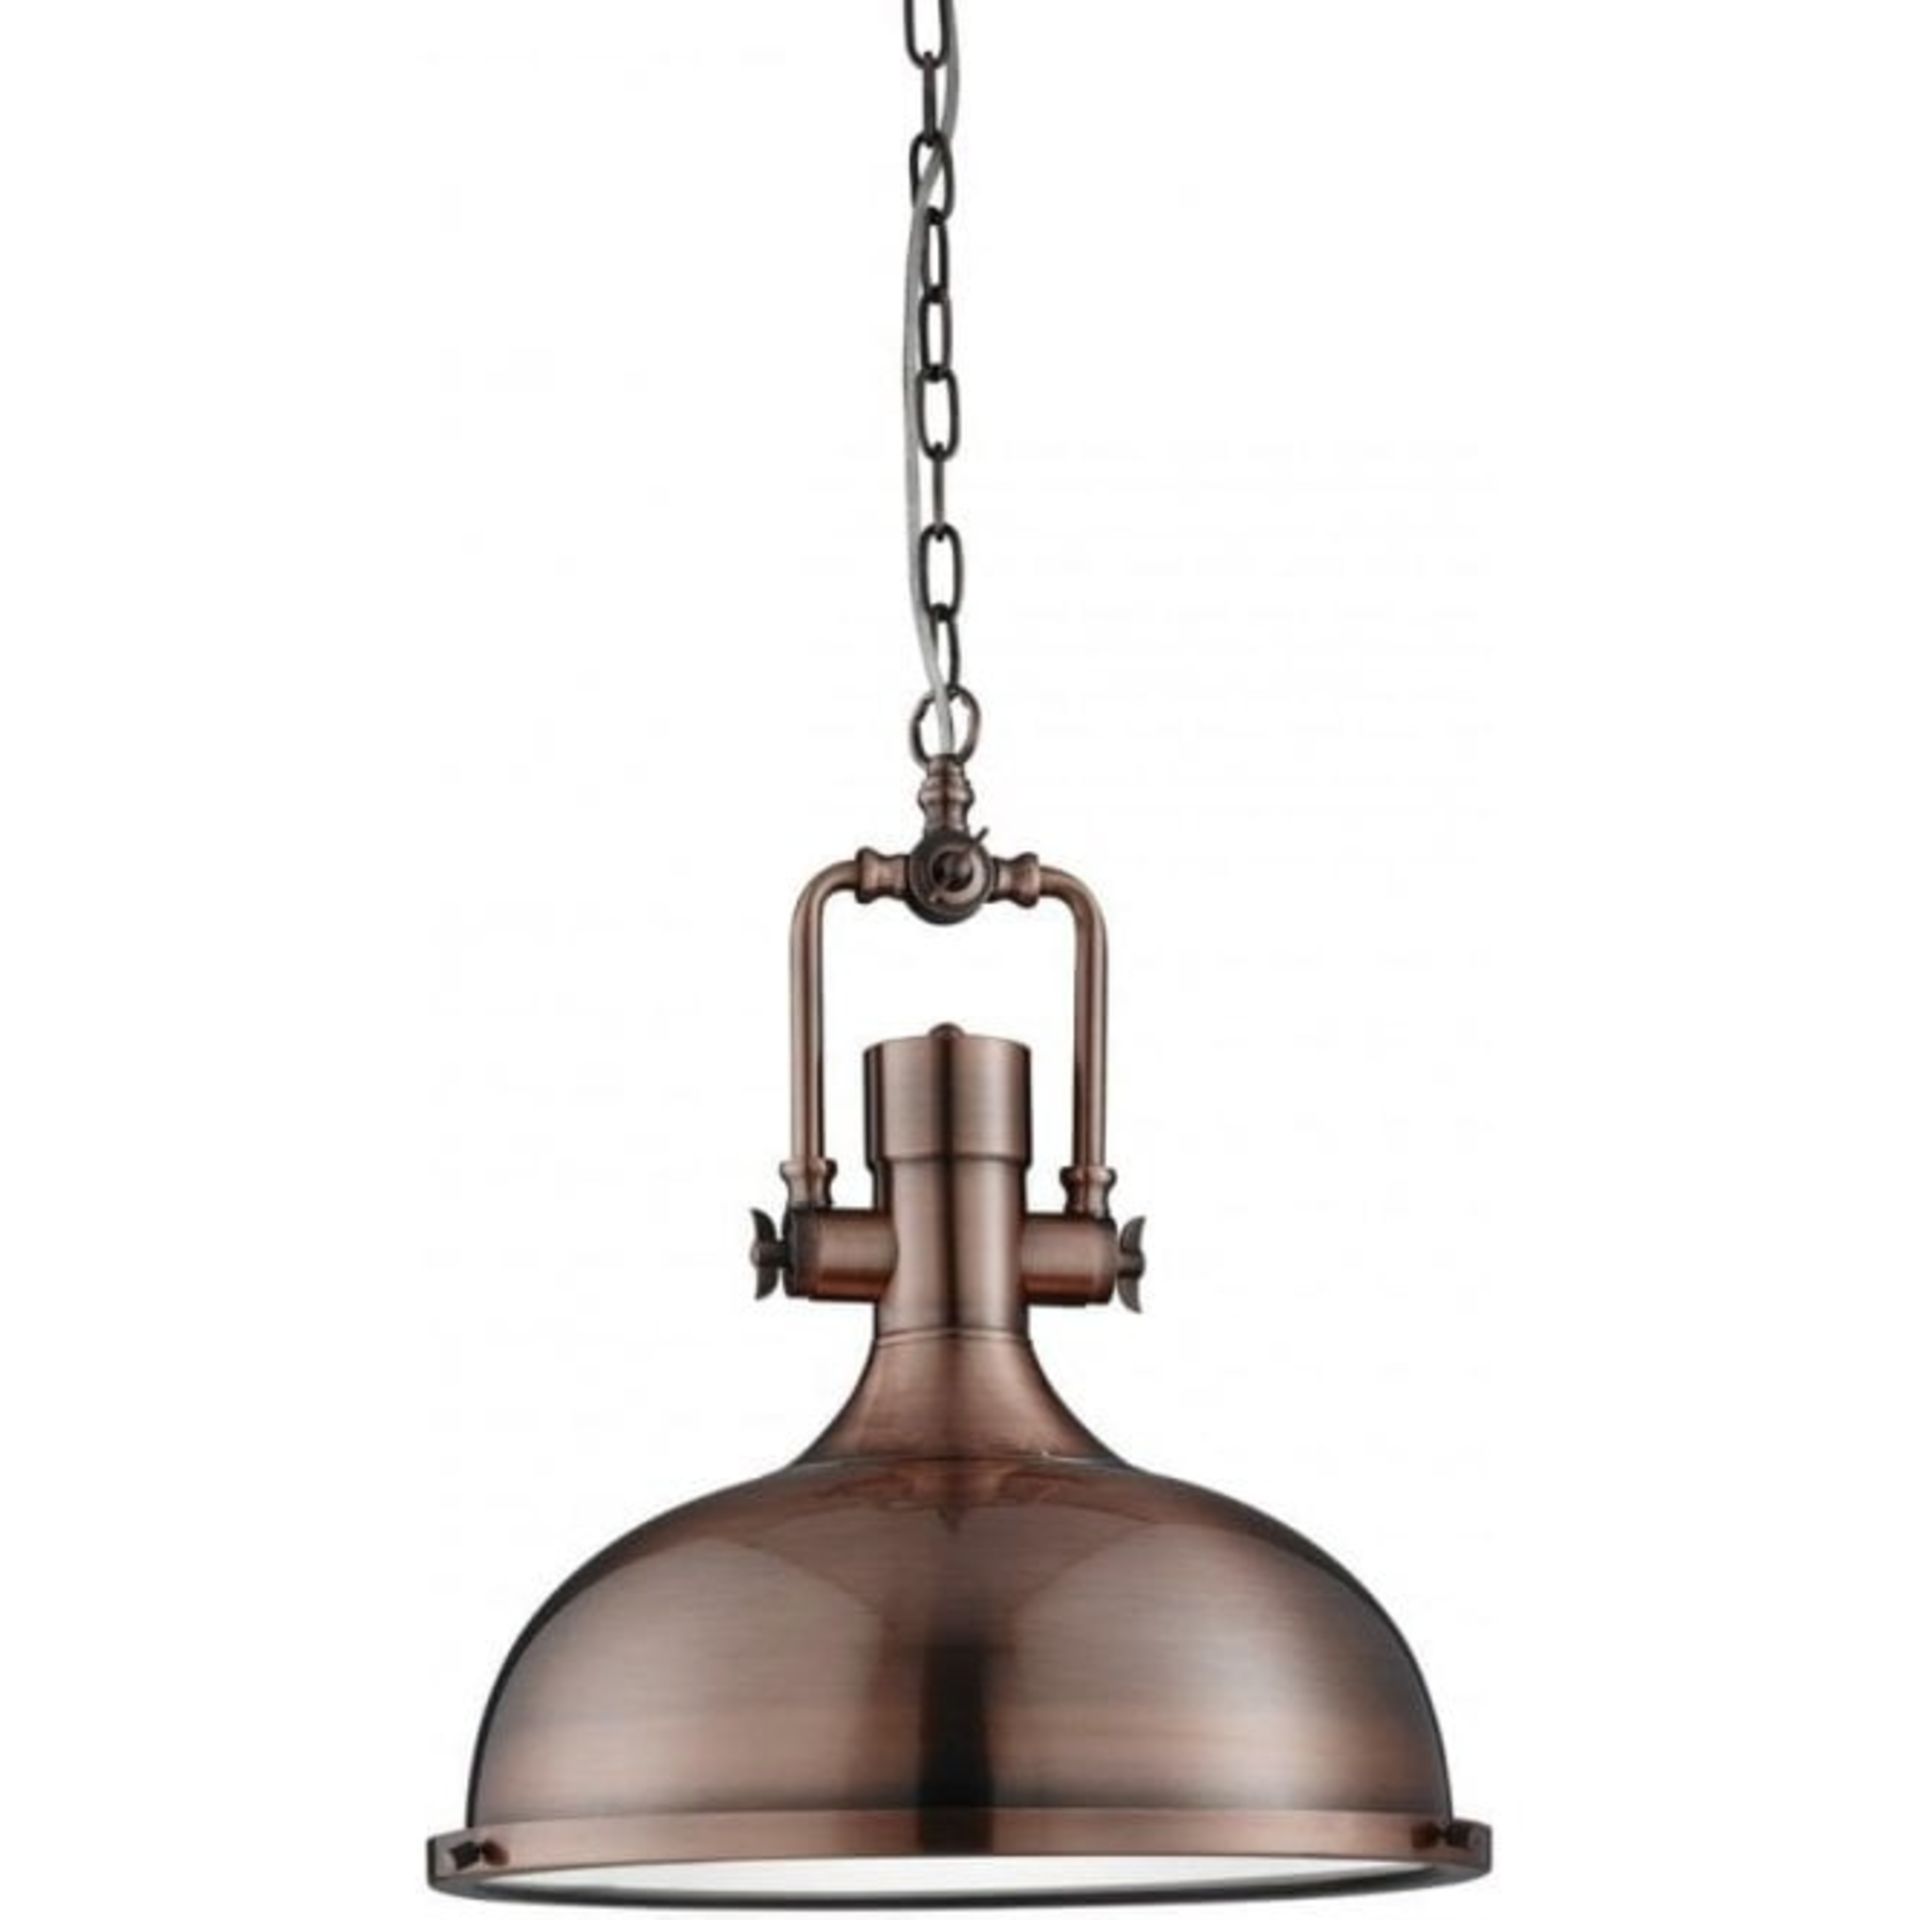 1 x Searchlight Industrial Pendant Light With an Antique Copper and Frosted Glass Finish - Product